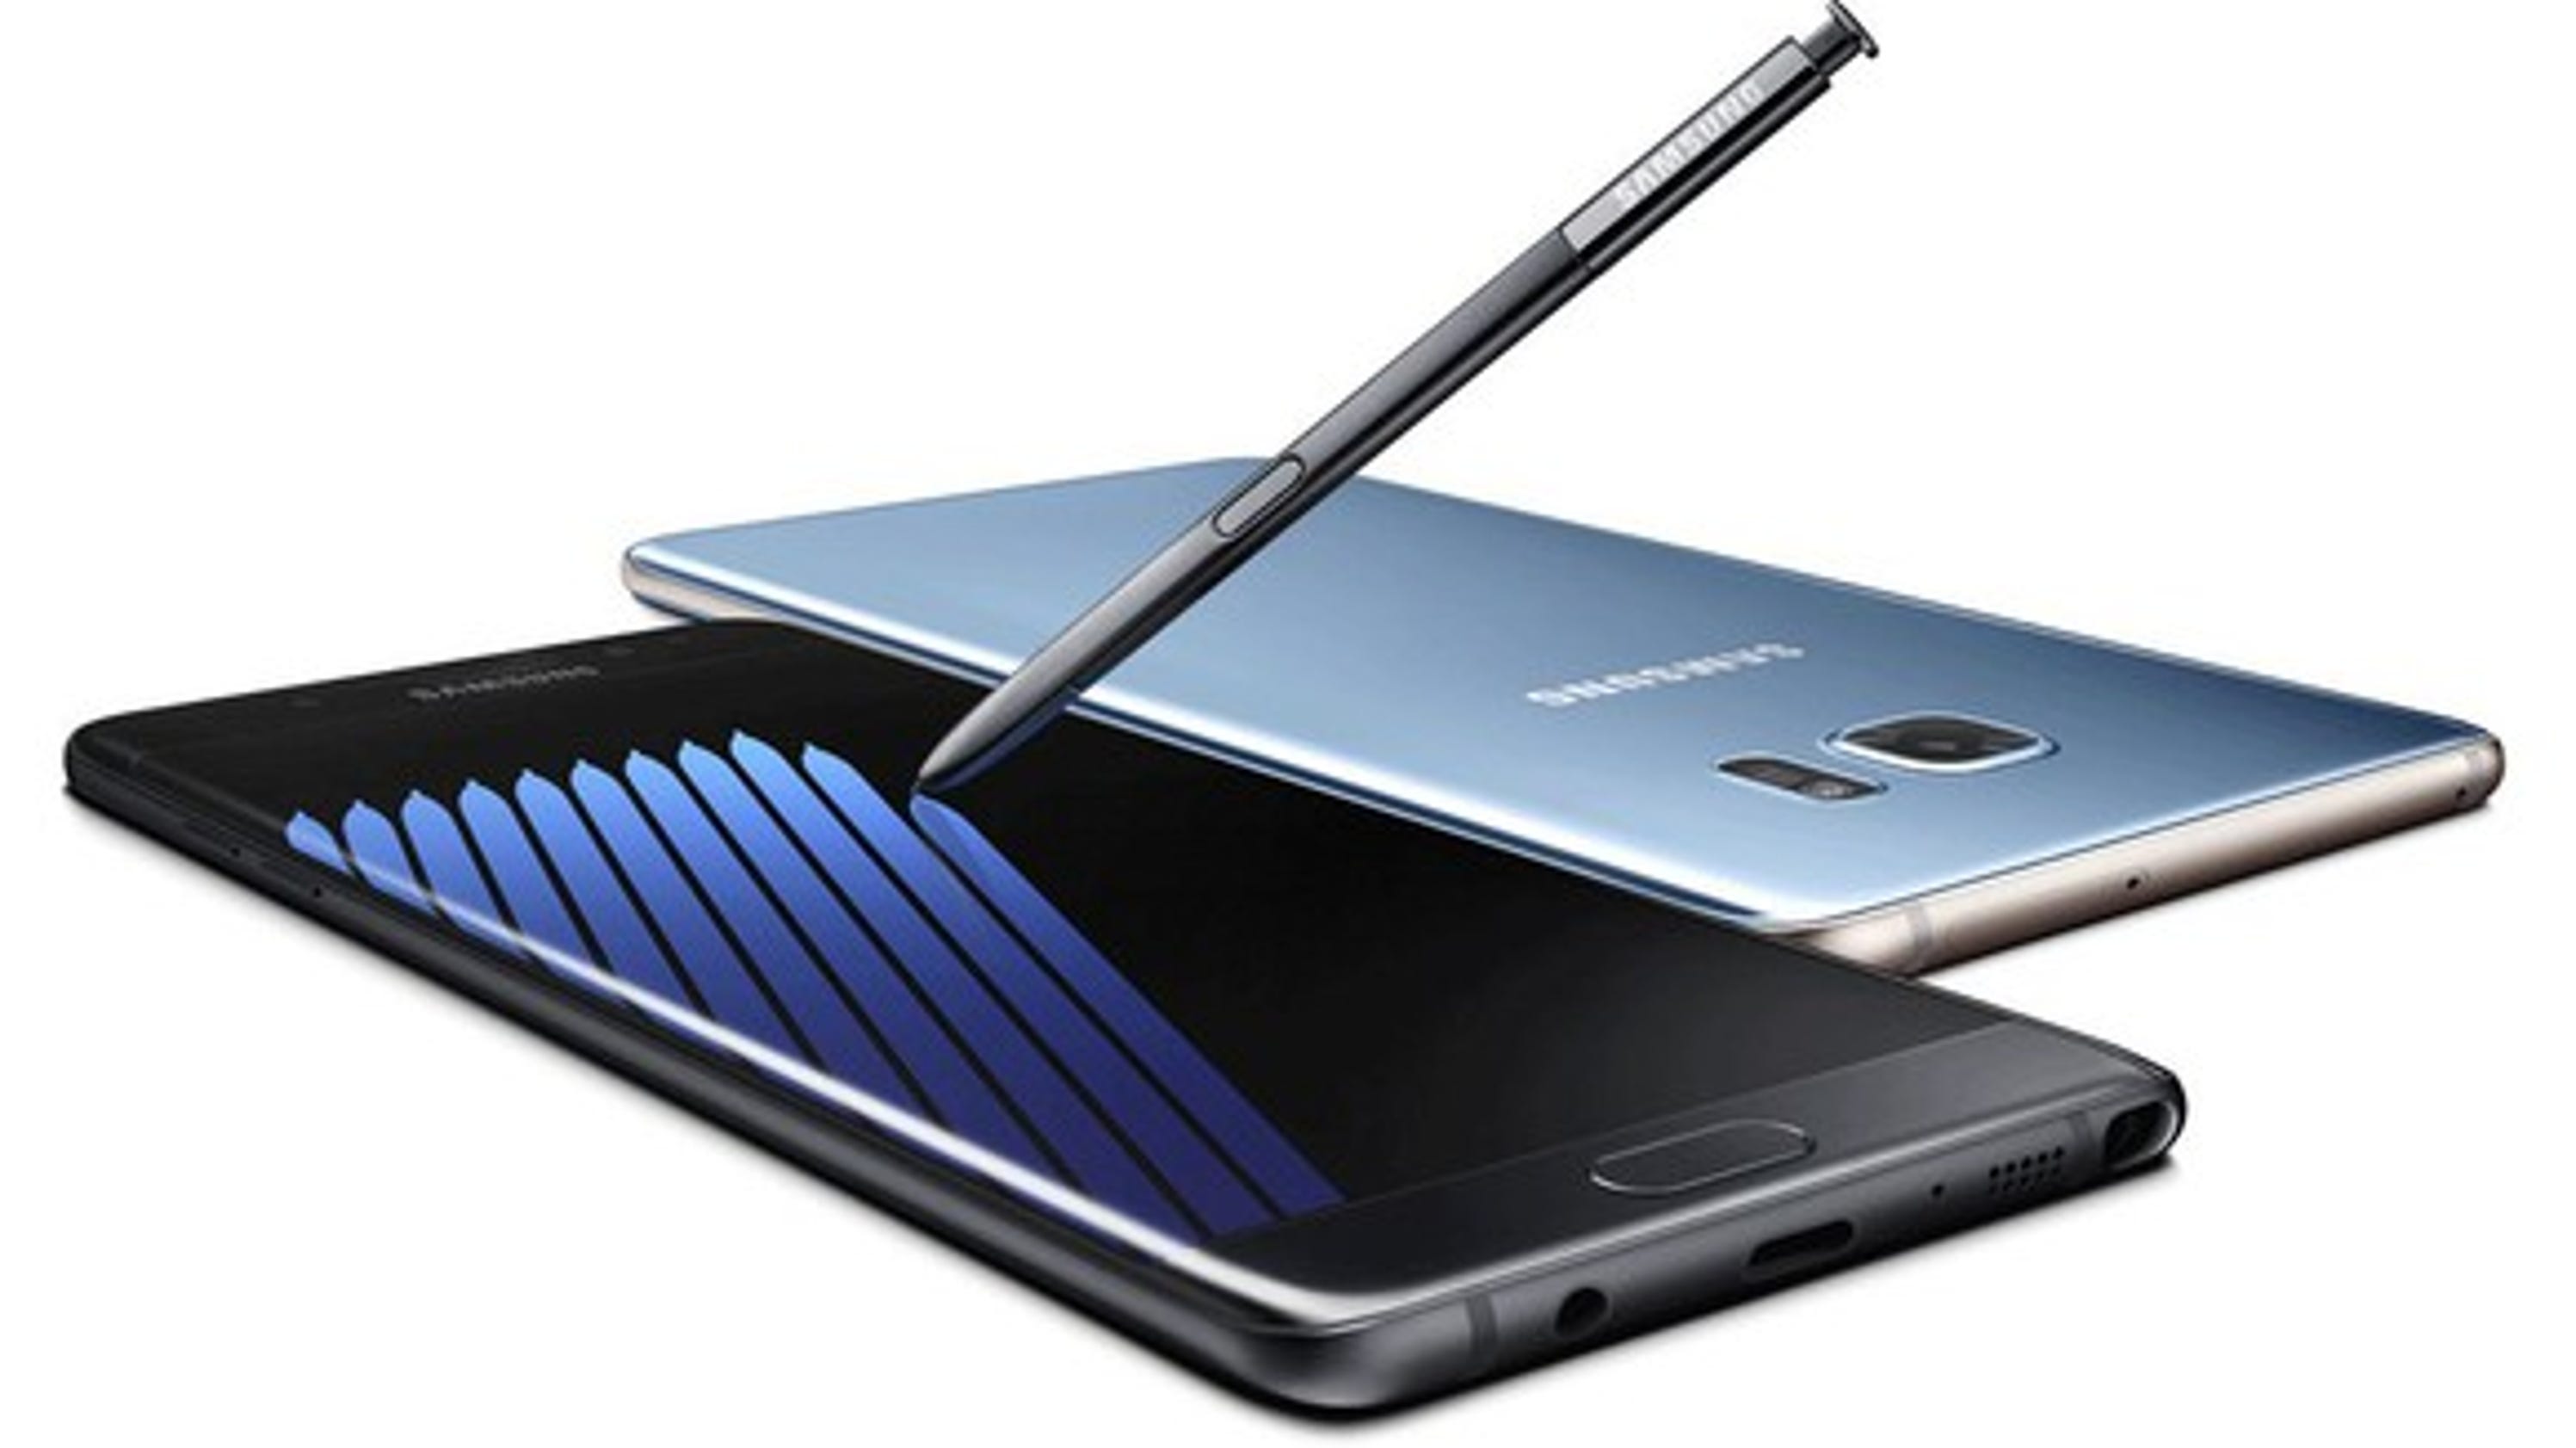 Samsung to bring back Galaxy Note brand in August